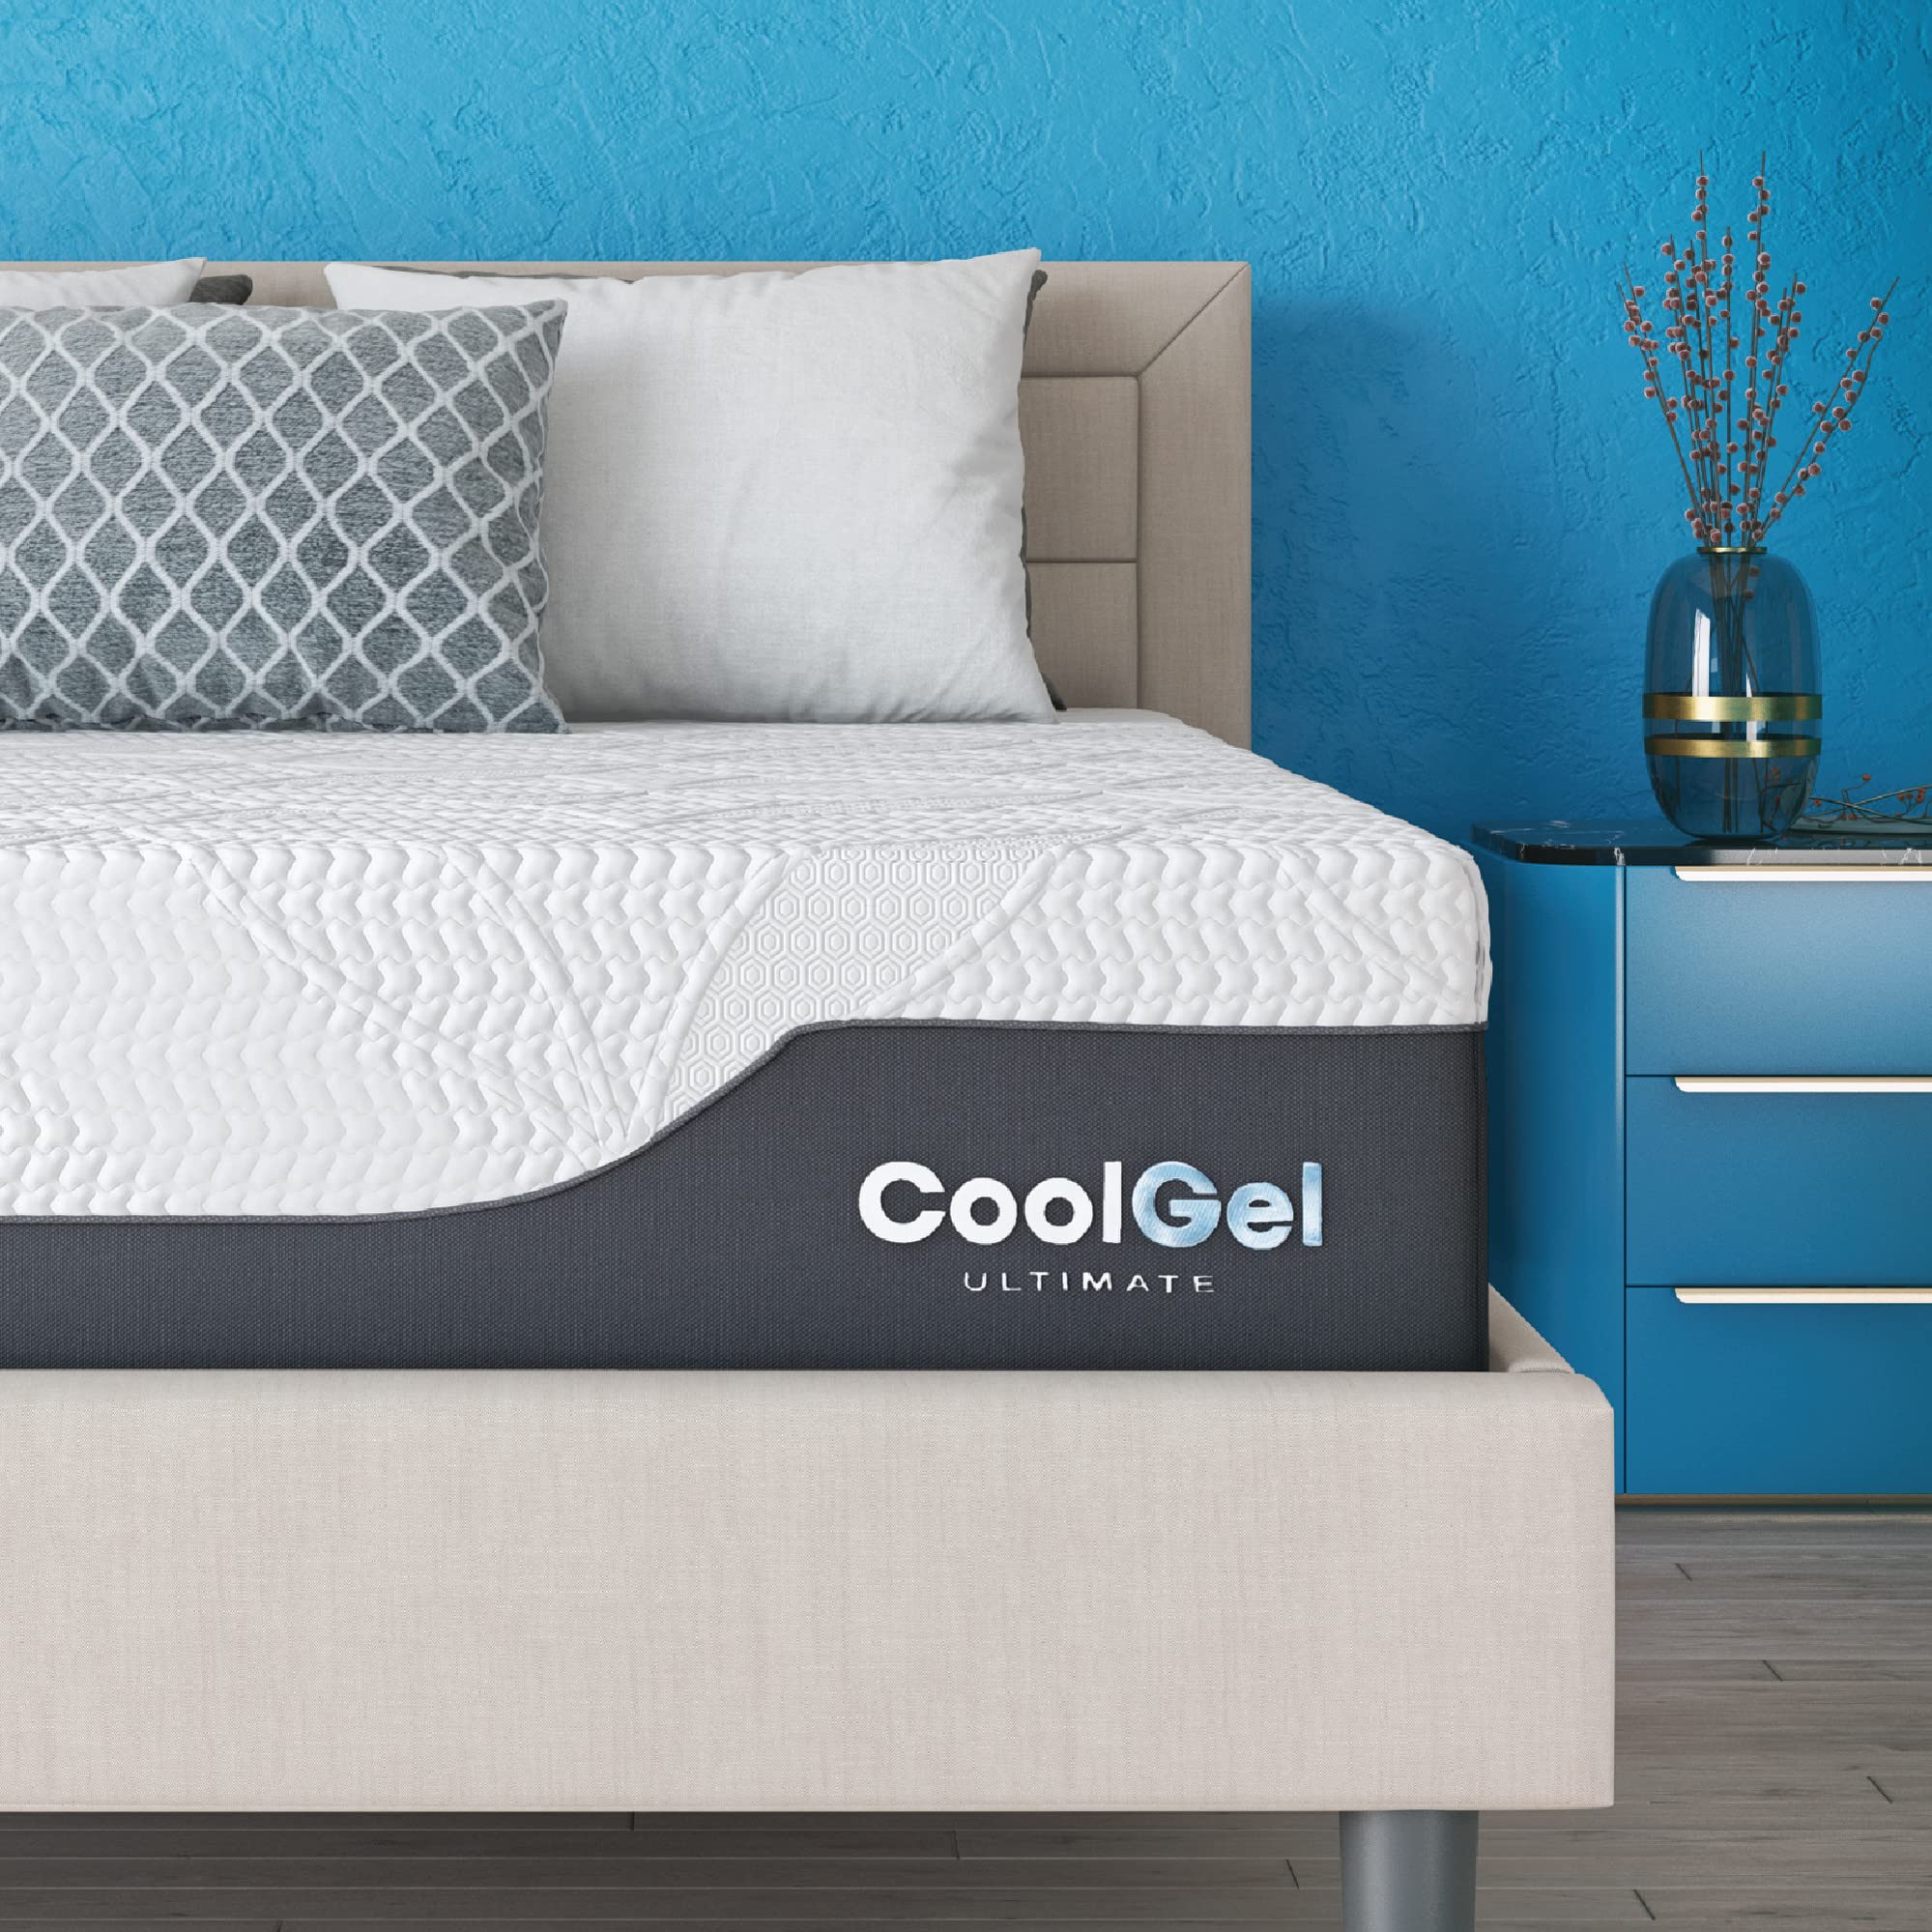 Book Cover Classic Brands Cool Gel Chill Memory Foam 14-Inch Mattress with 2 Pillows |CertiPUR-US Certified |Bed-in-a-Box, Queen White Queen Classic